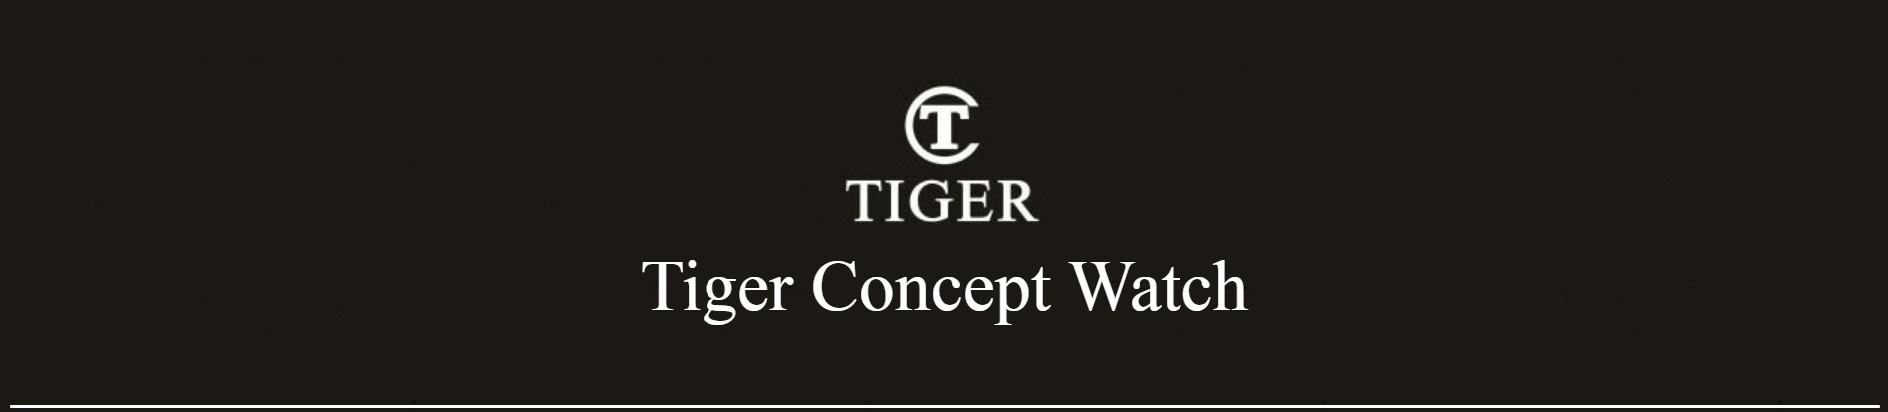 Tiger-concept Watches